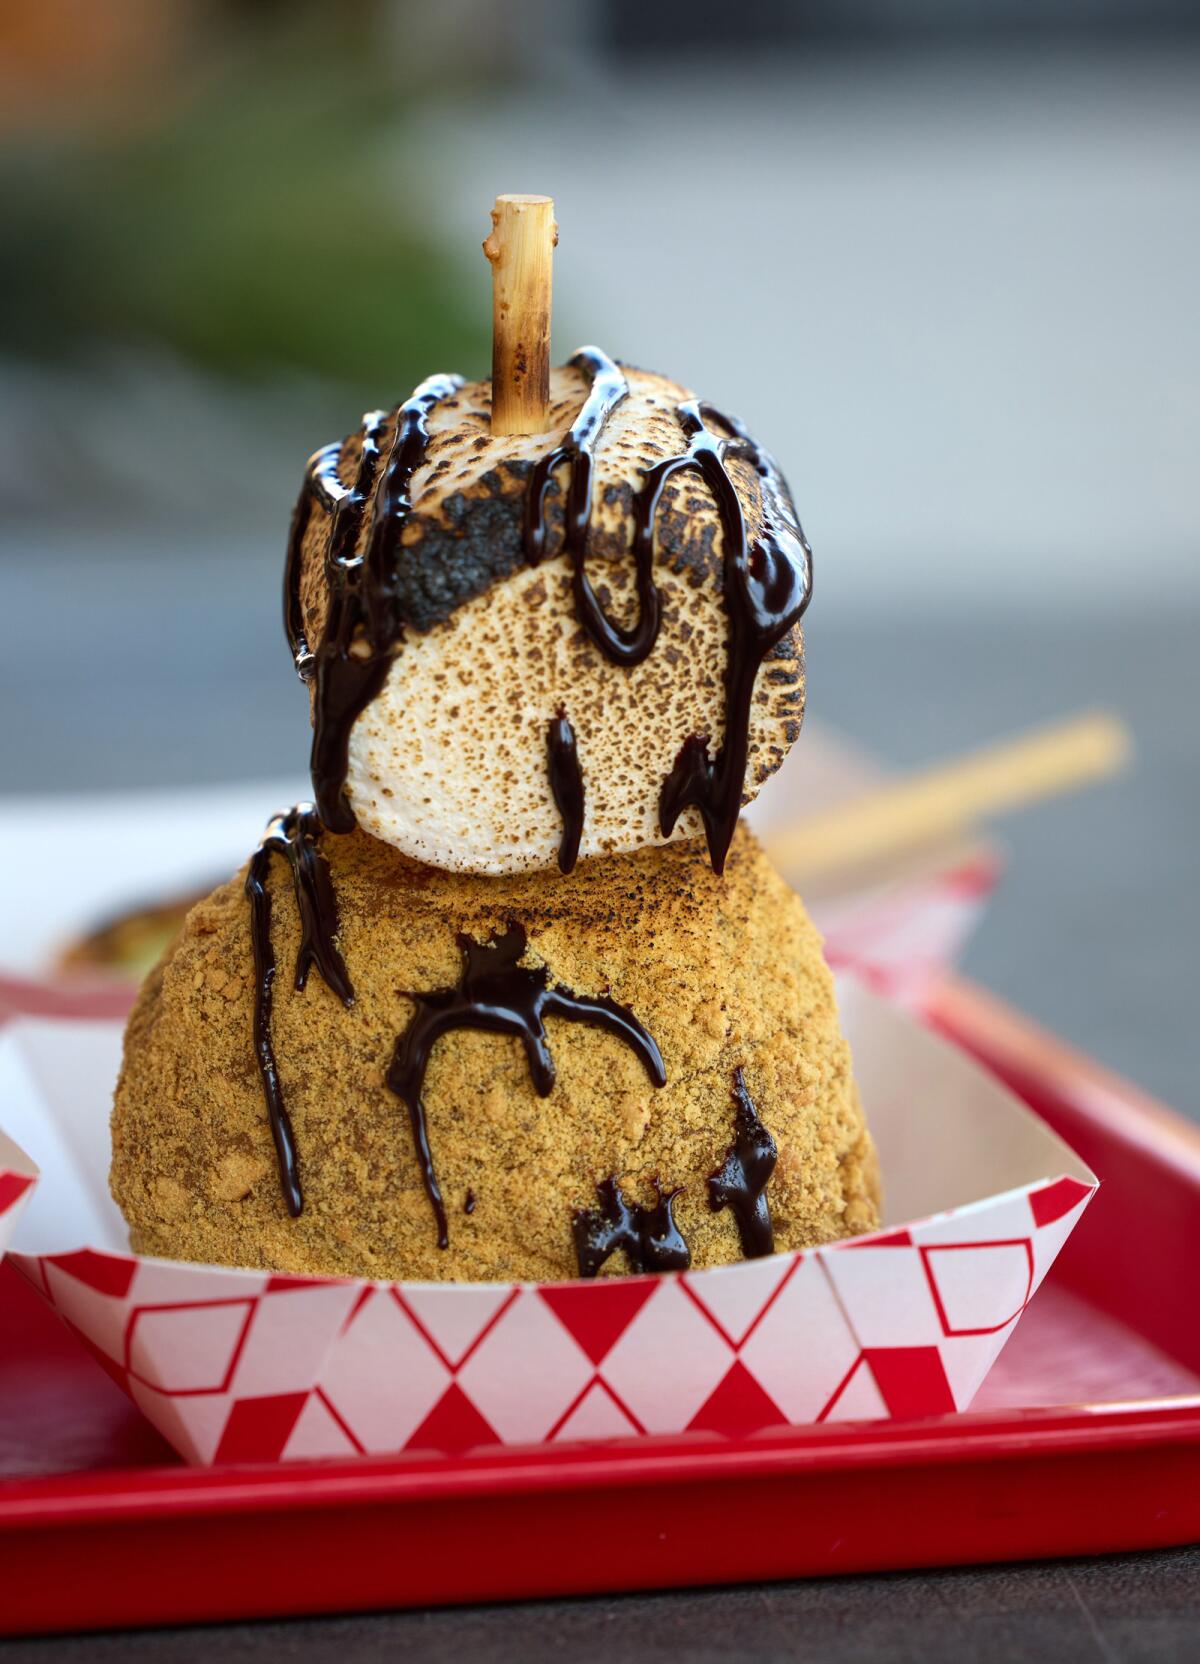 The S'mores Caramel Apple from the Candyland booth